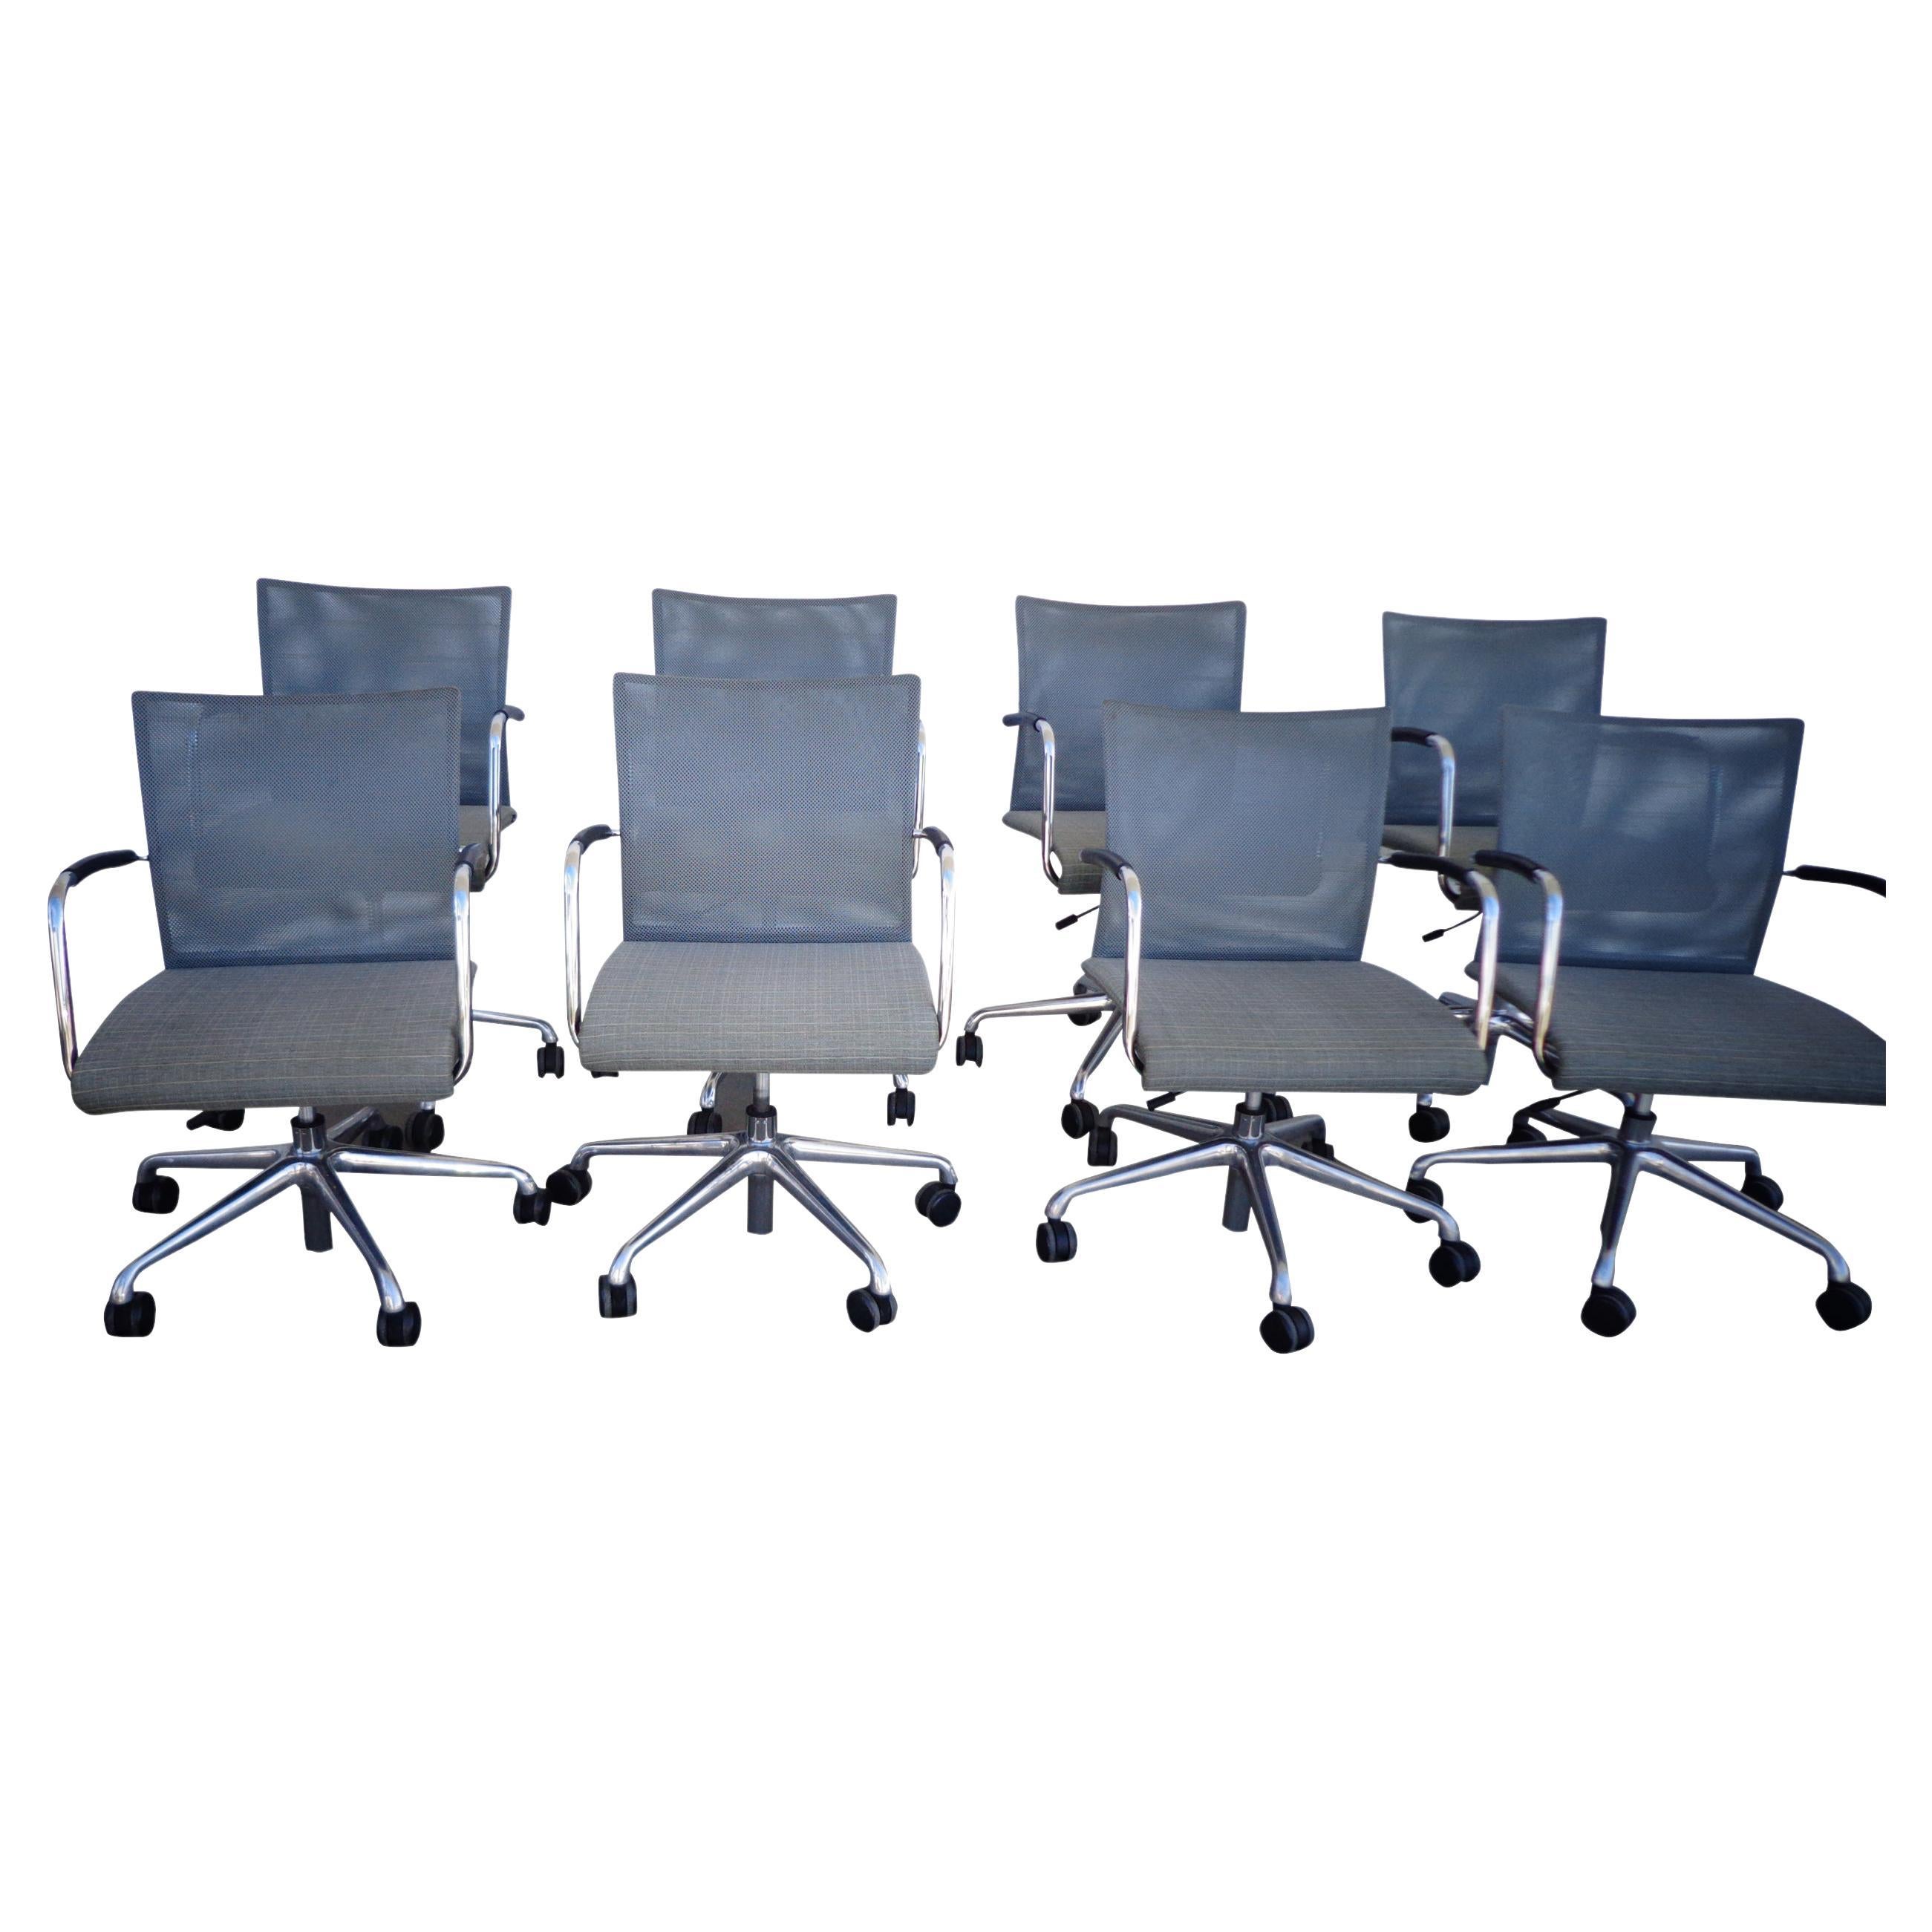 Dauphin Stilo conference with 5 star base and casters

Stilo’s clean lines with rounded edges and wide, uninterrupted surfaces offers the perfect platform for showcasing any of Dauphin’s 14 soft, mesh colors. Equipped with patented QuickShift+